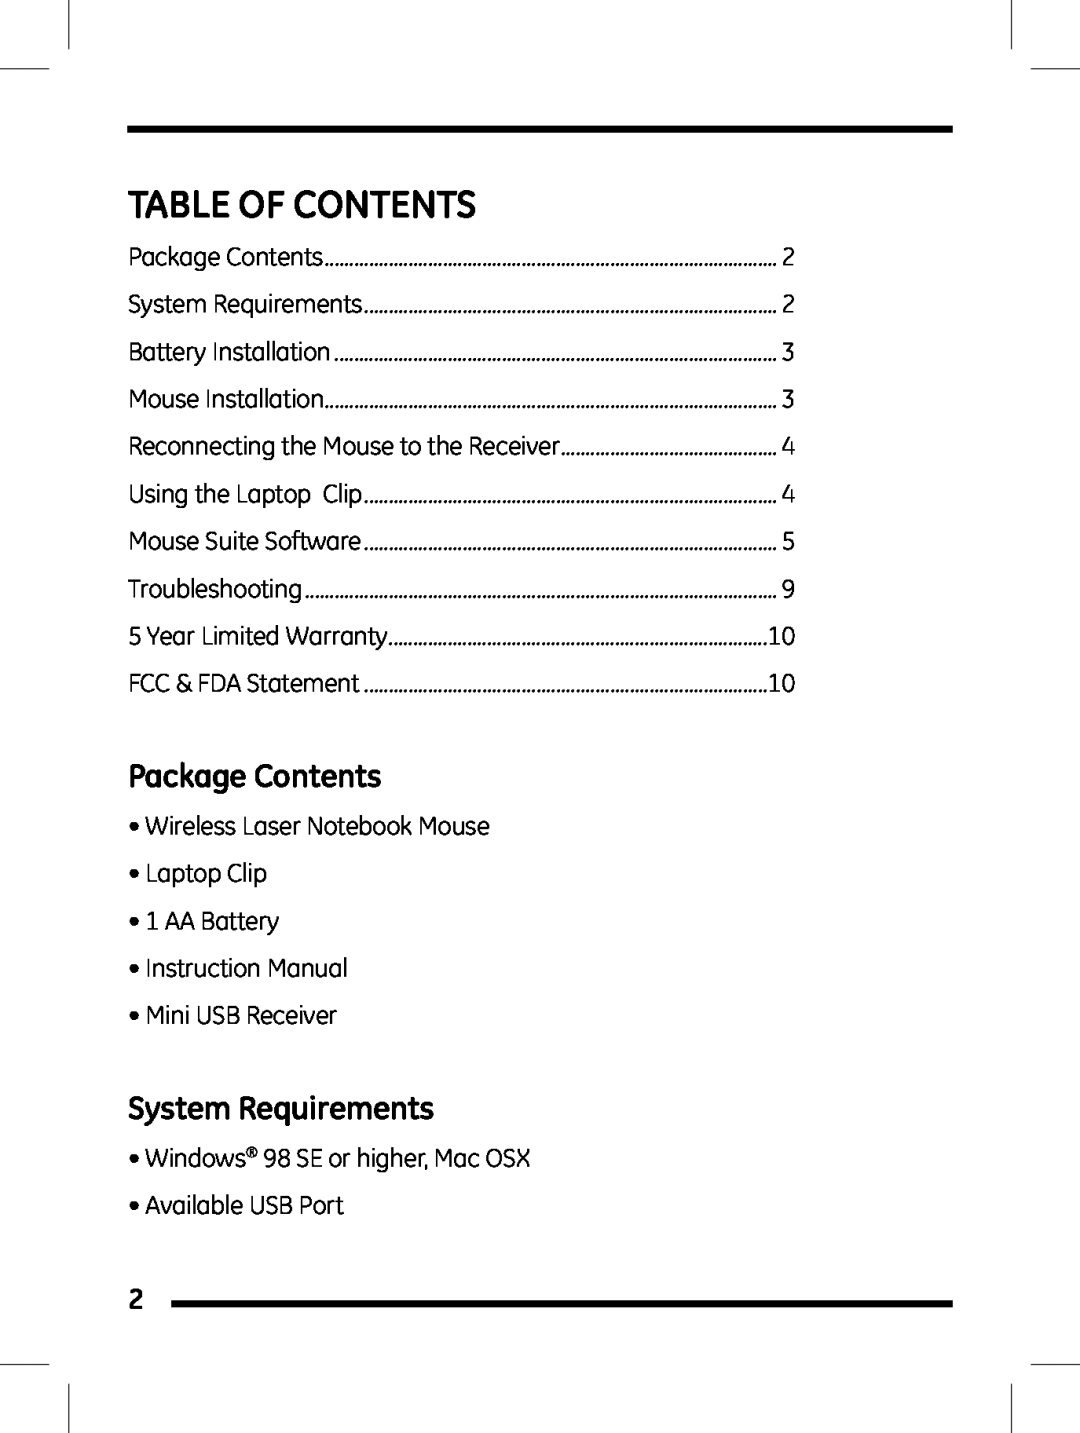 GE 98504 instruction manual Package Contents, System Requirements, Table Of Contents 